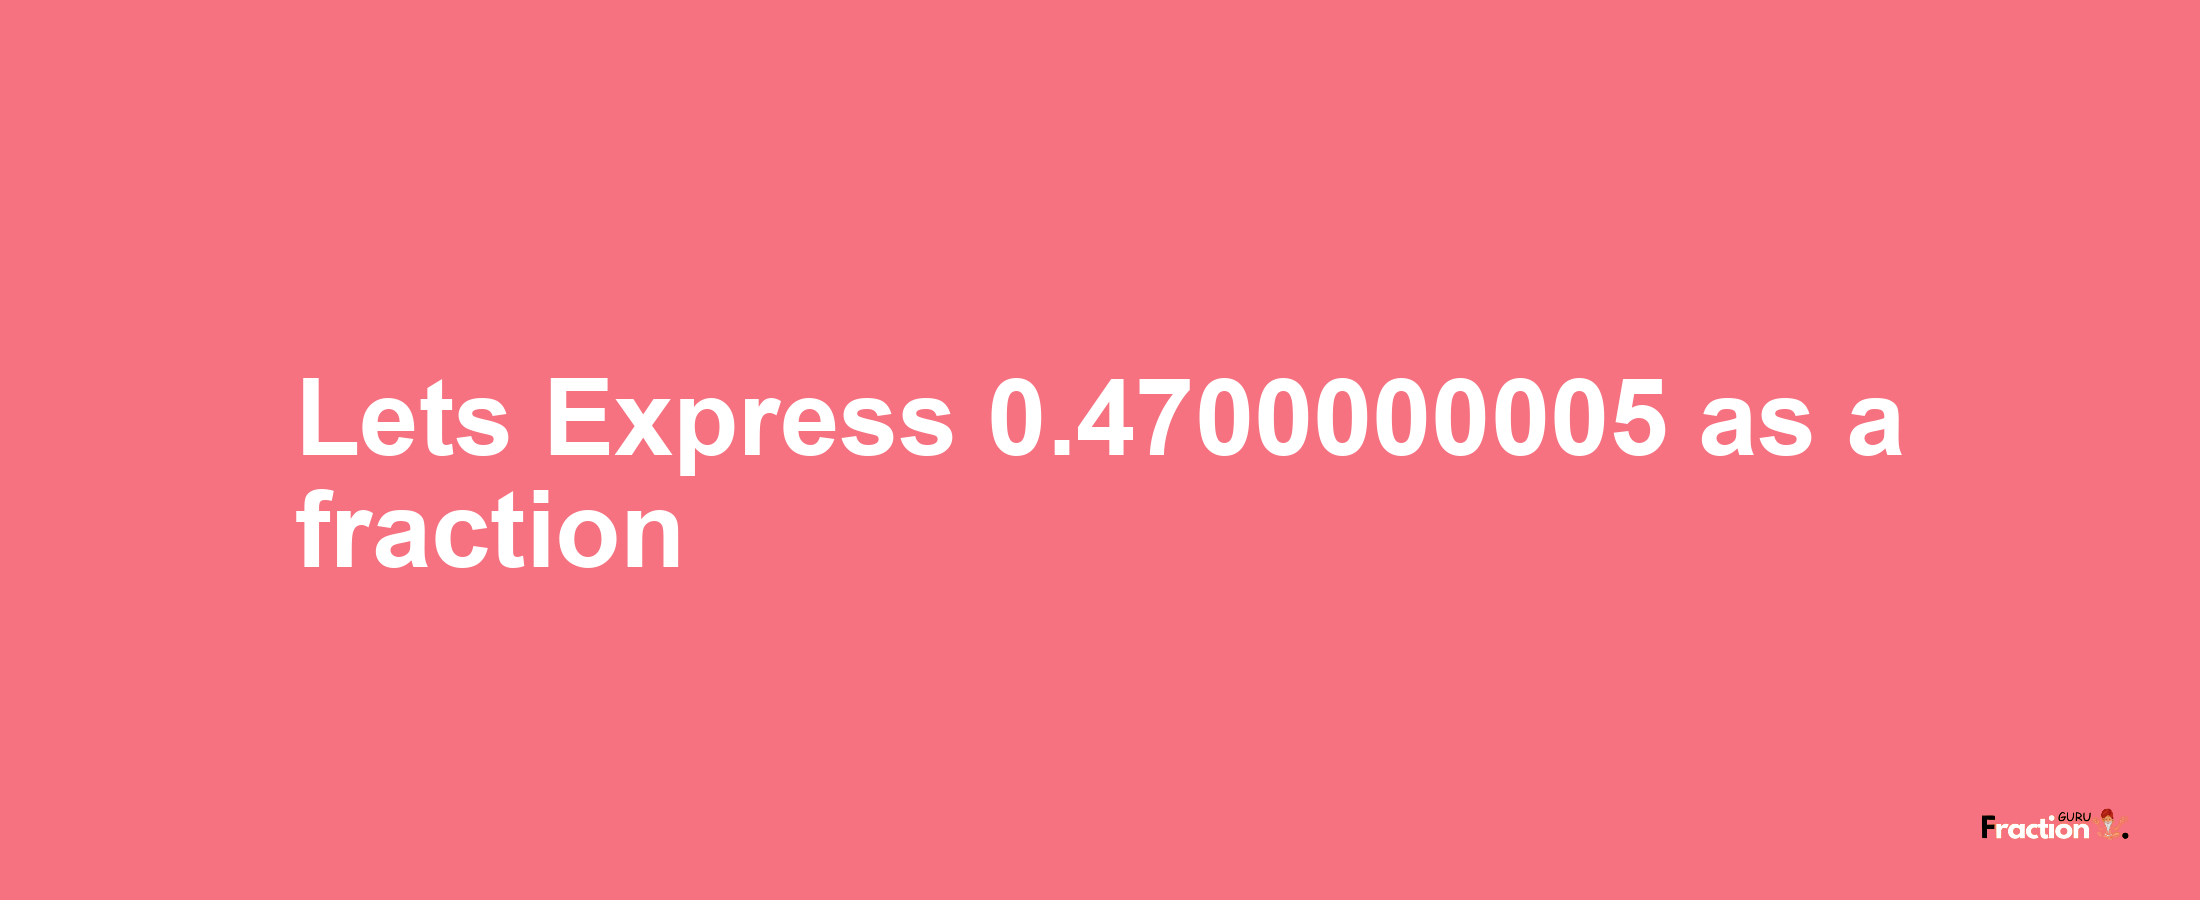 Lets Express 0.4700000005 as afraction